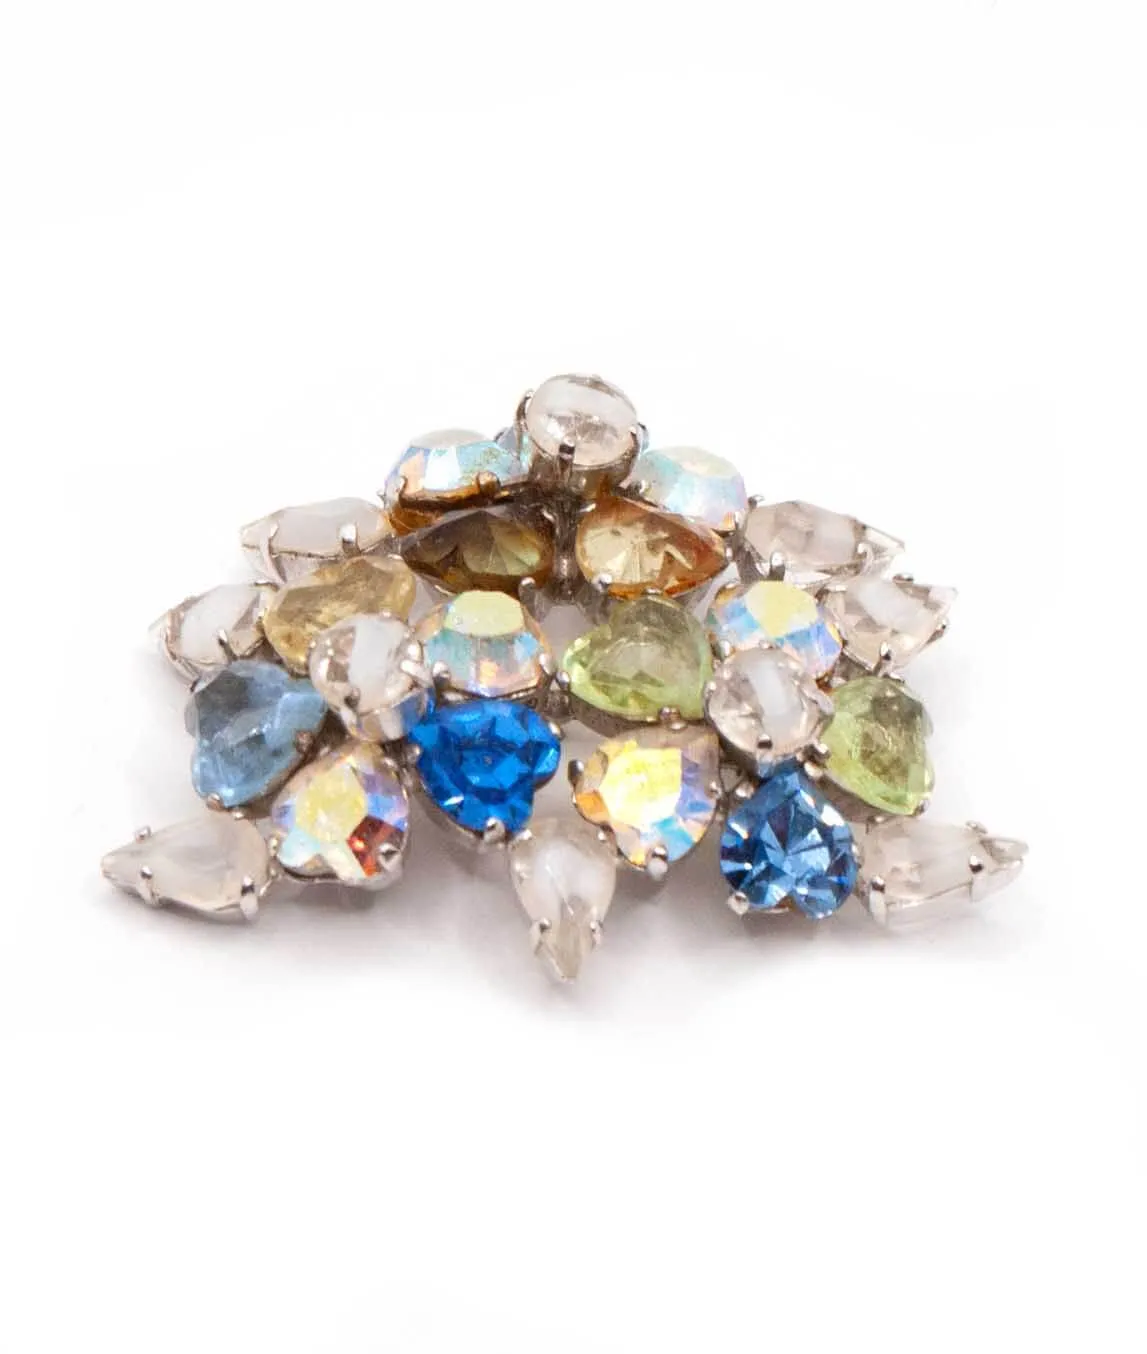 Side view of Christian Dior vintage 1960s brooch with blue and aurora borealis heart shaped crystals